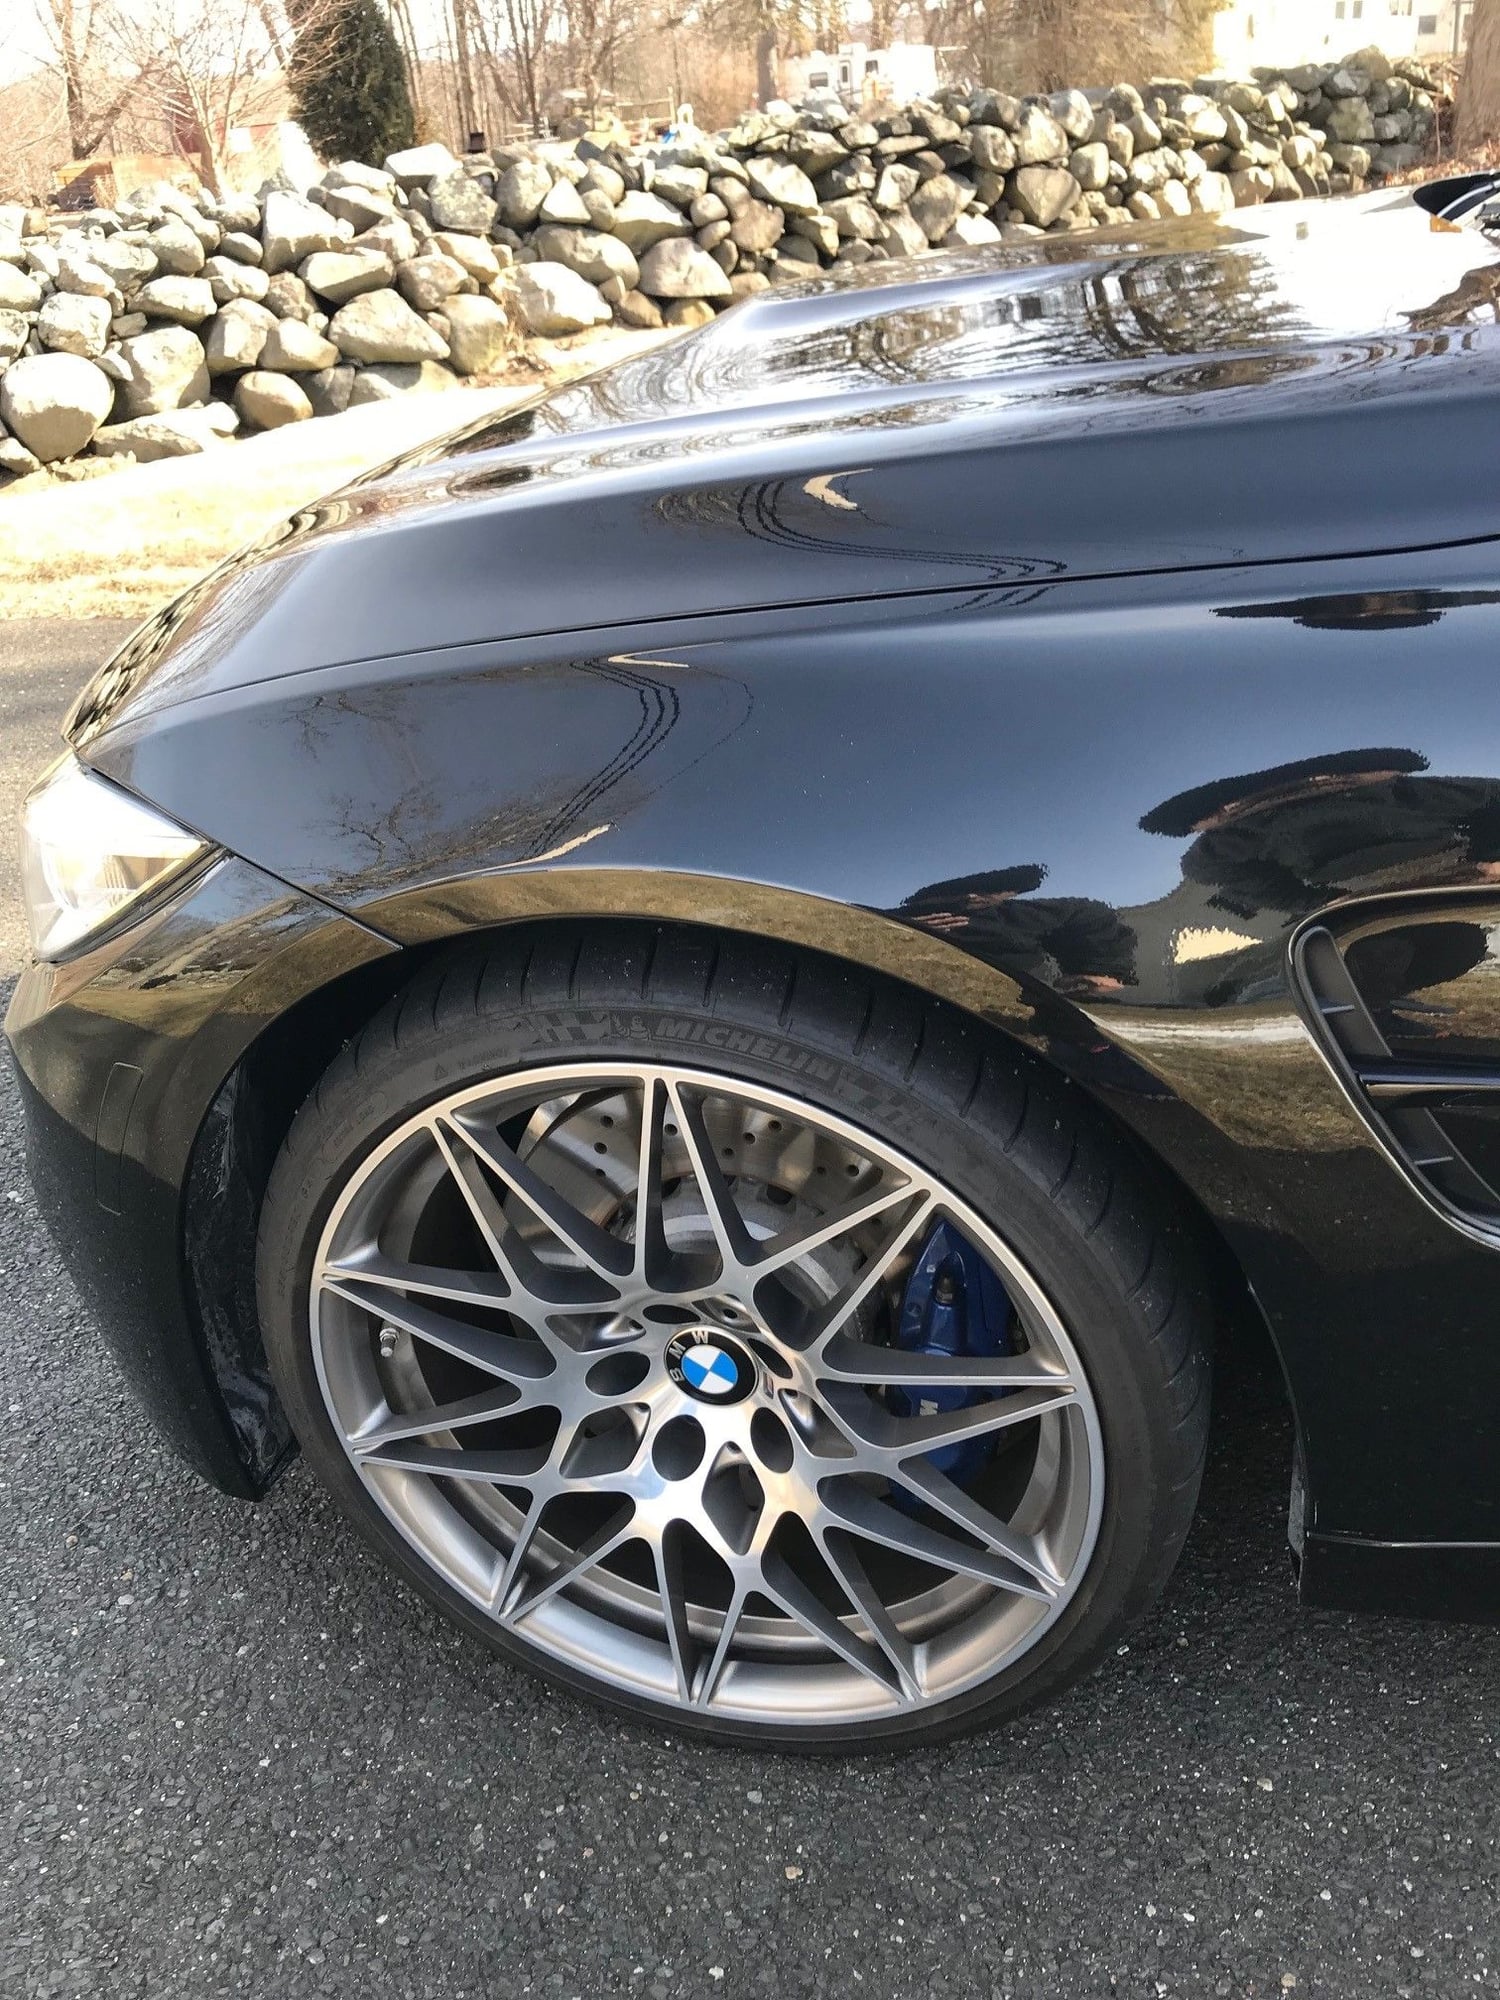 2017 BMW M3 - 2017 BMW M3 Competition Package, 6 speed manual, under 6,000 miles priced to sell. - Used - VIN WBS8M9C57H5G42244 - 5,785 Miles - 6 cyl - 2WD - Manual - Sedan - Black - Ludlow, MA 01056, United States